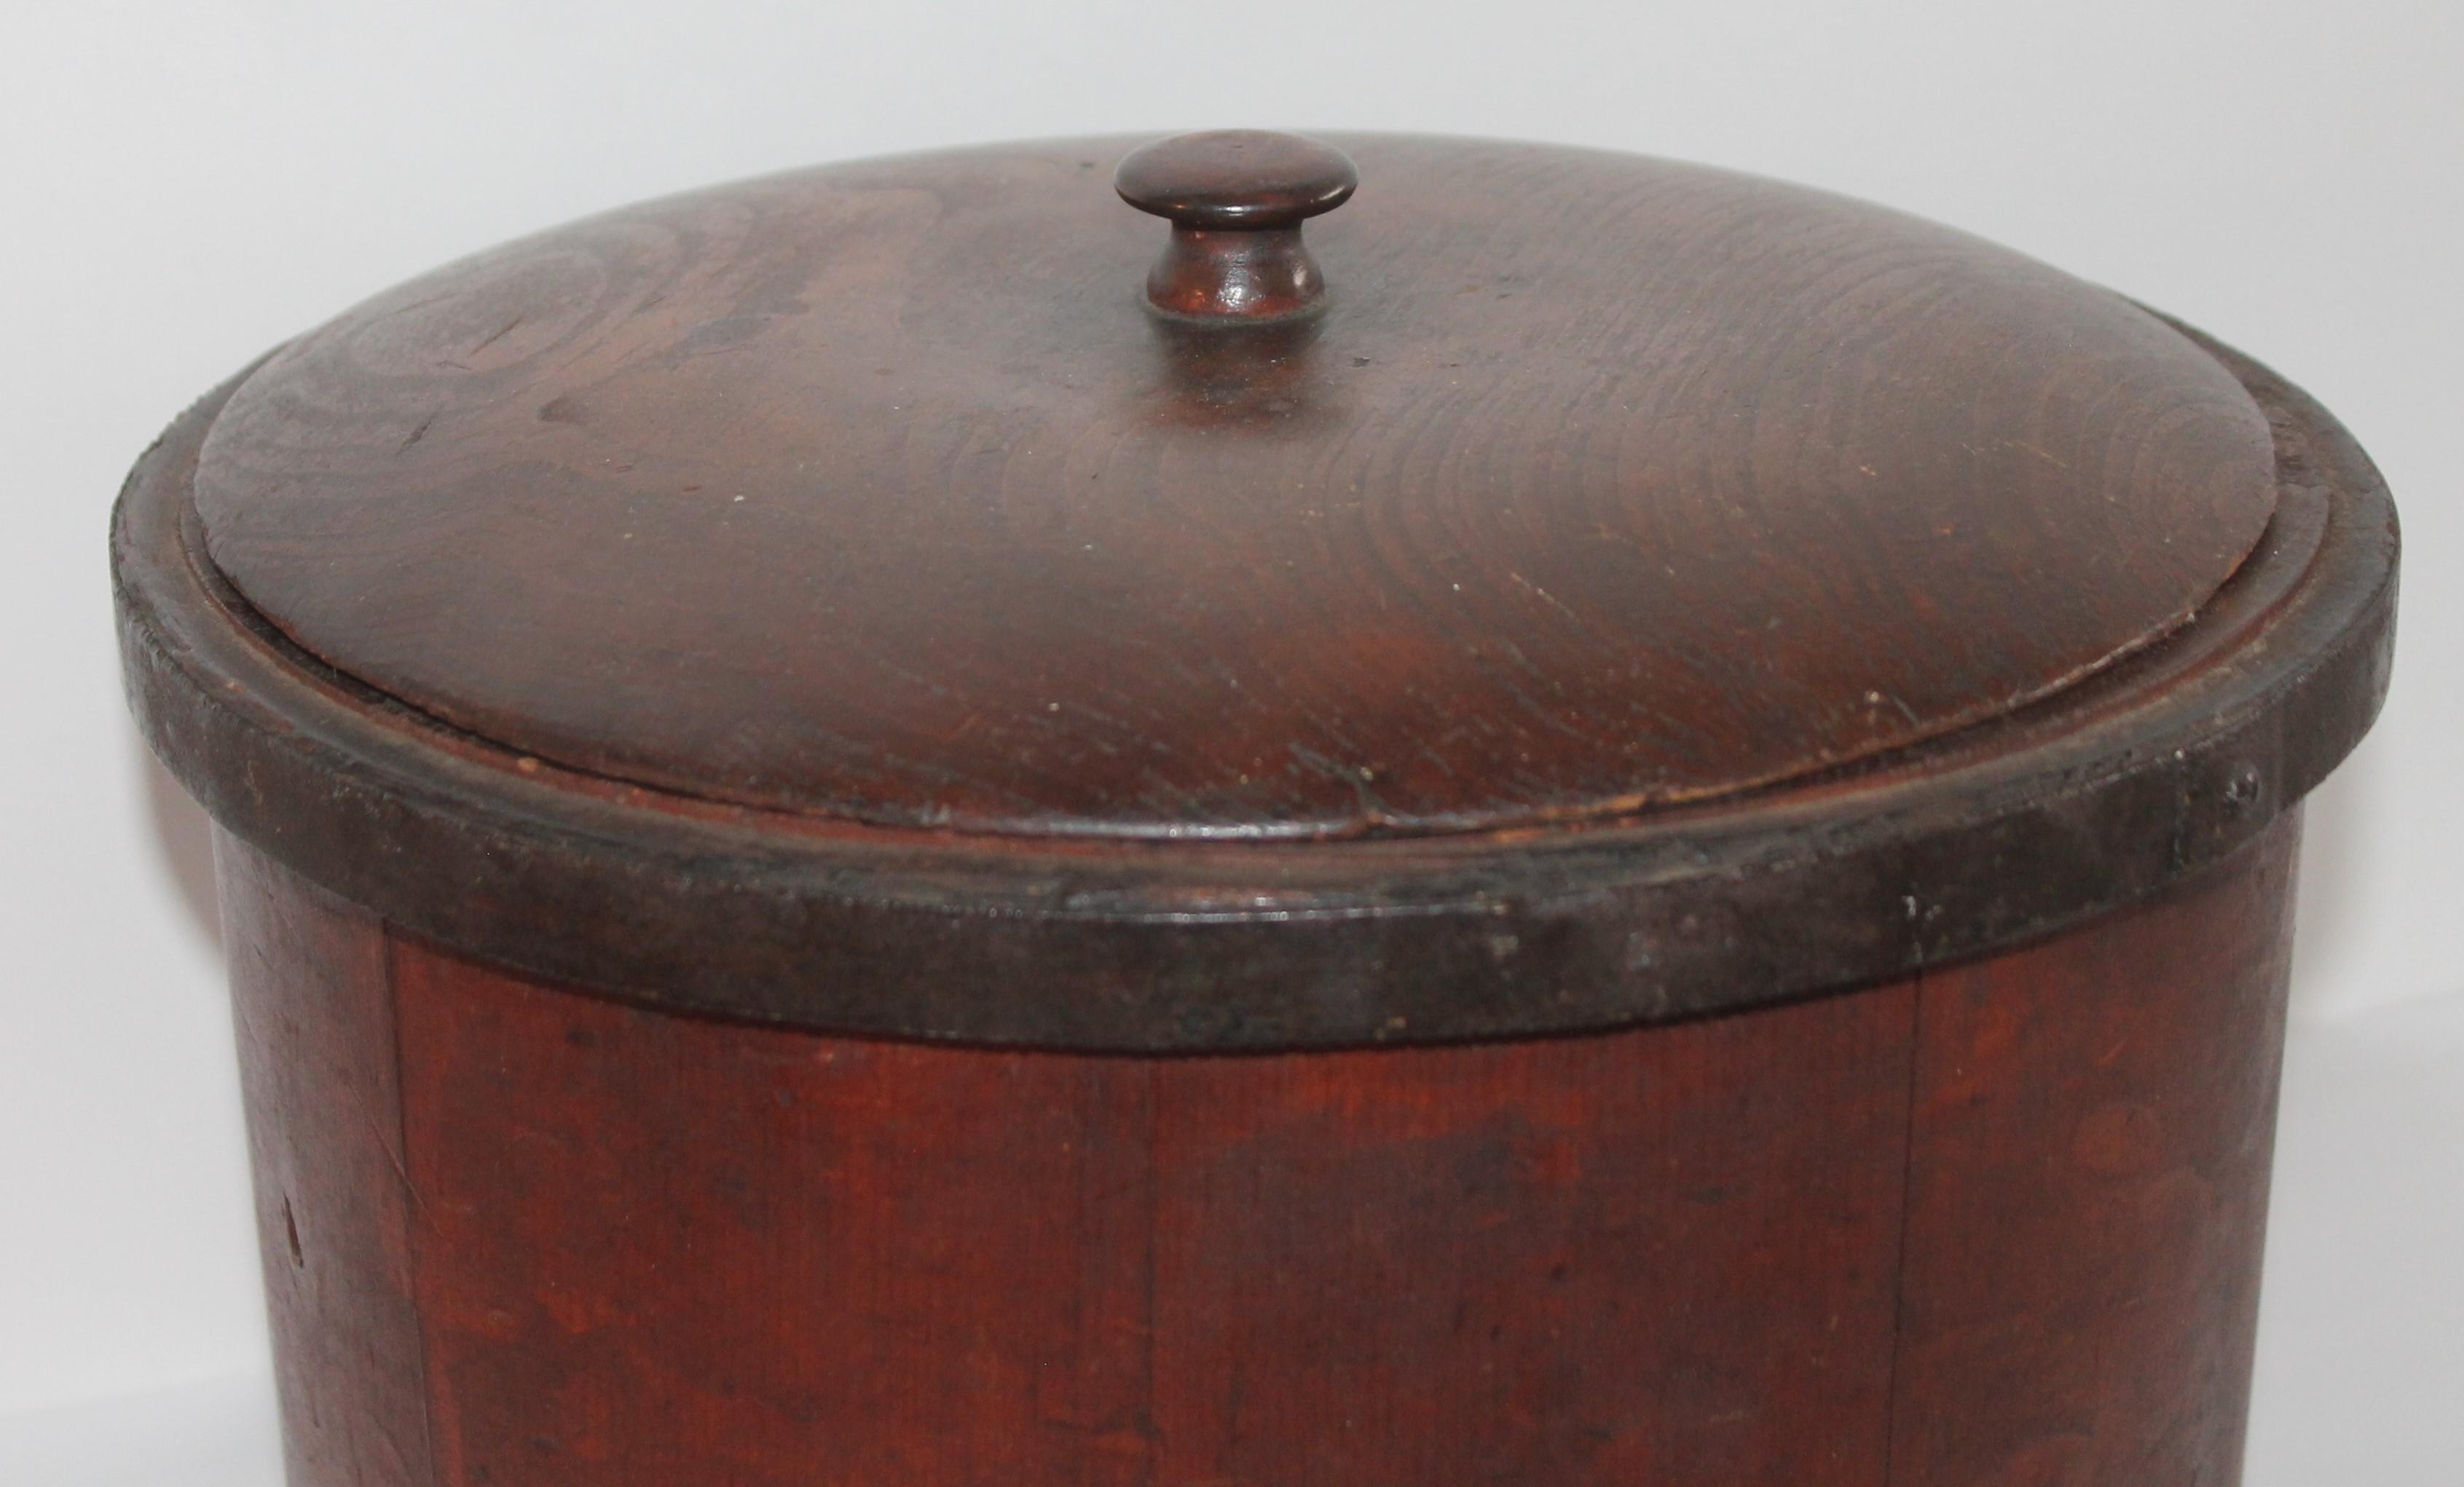 This 19th century Shaker style original red painted container with the original hand carved lid is in fine condition.